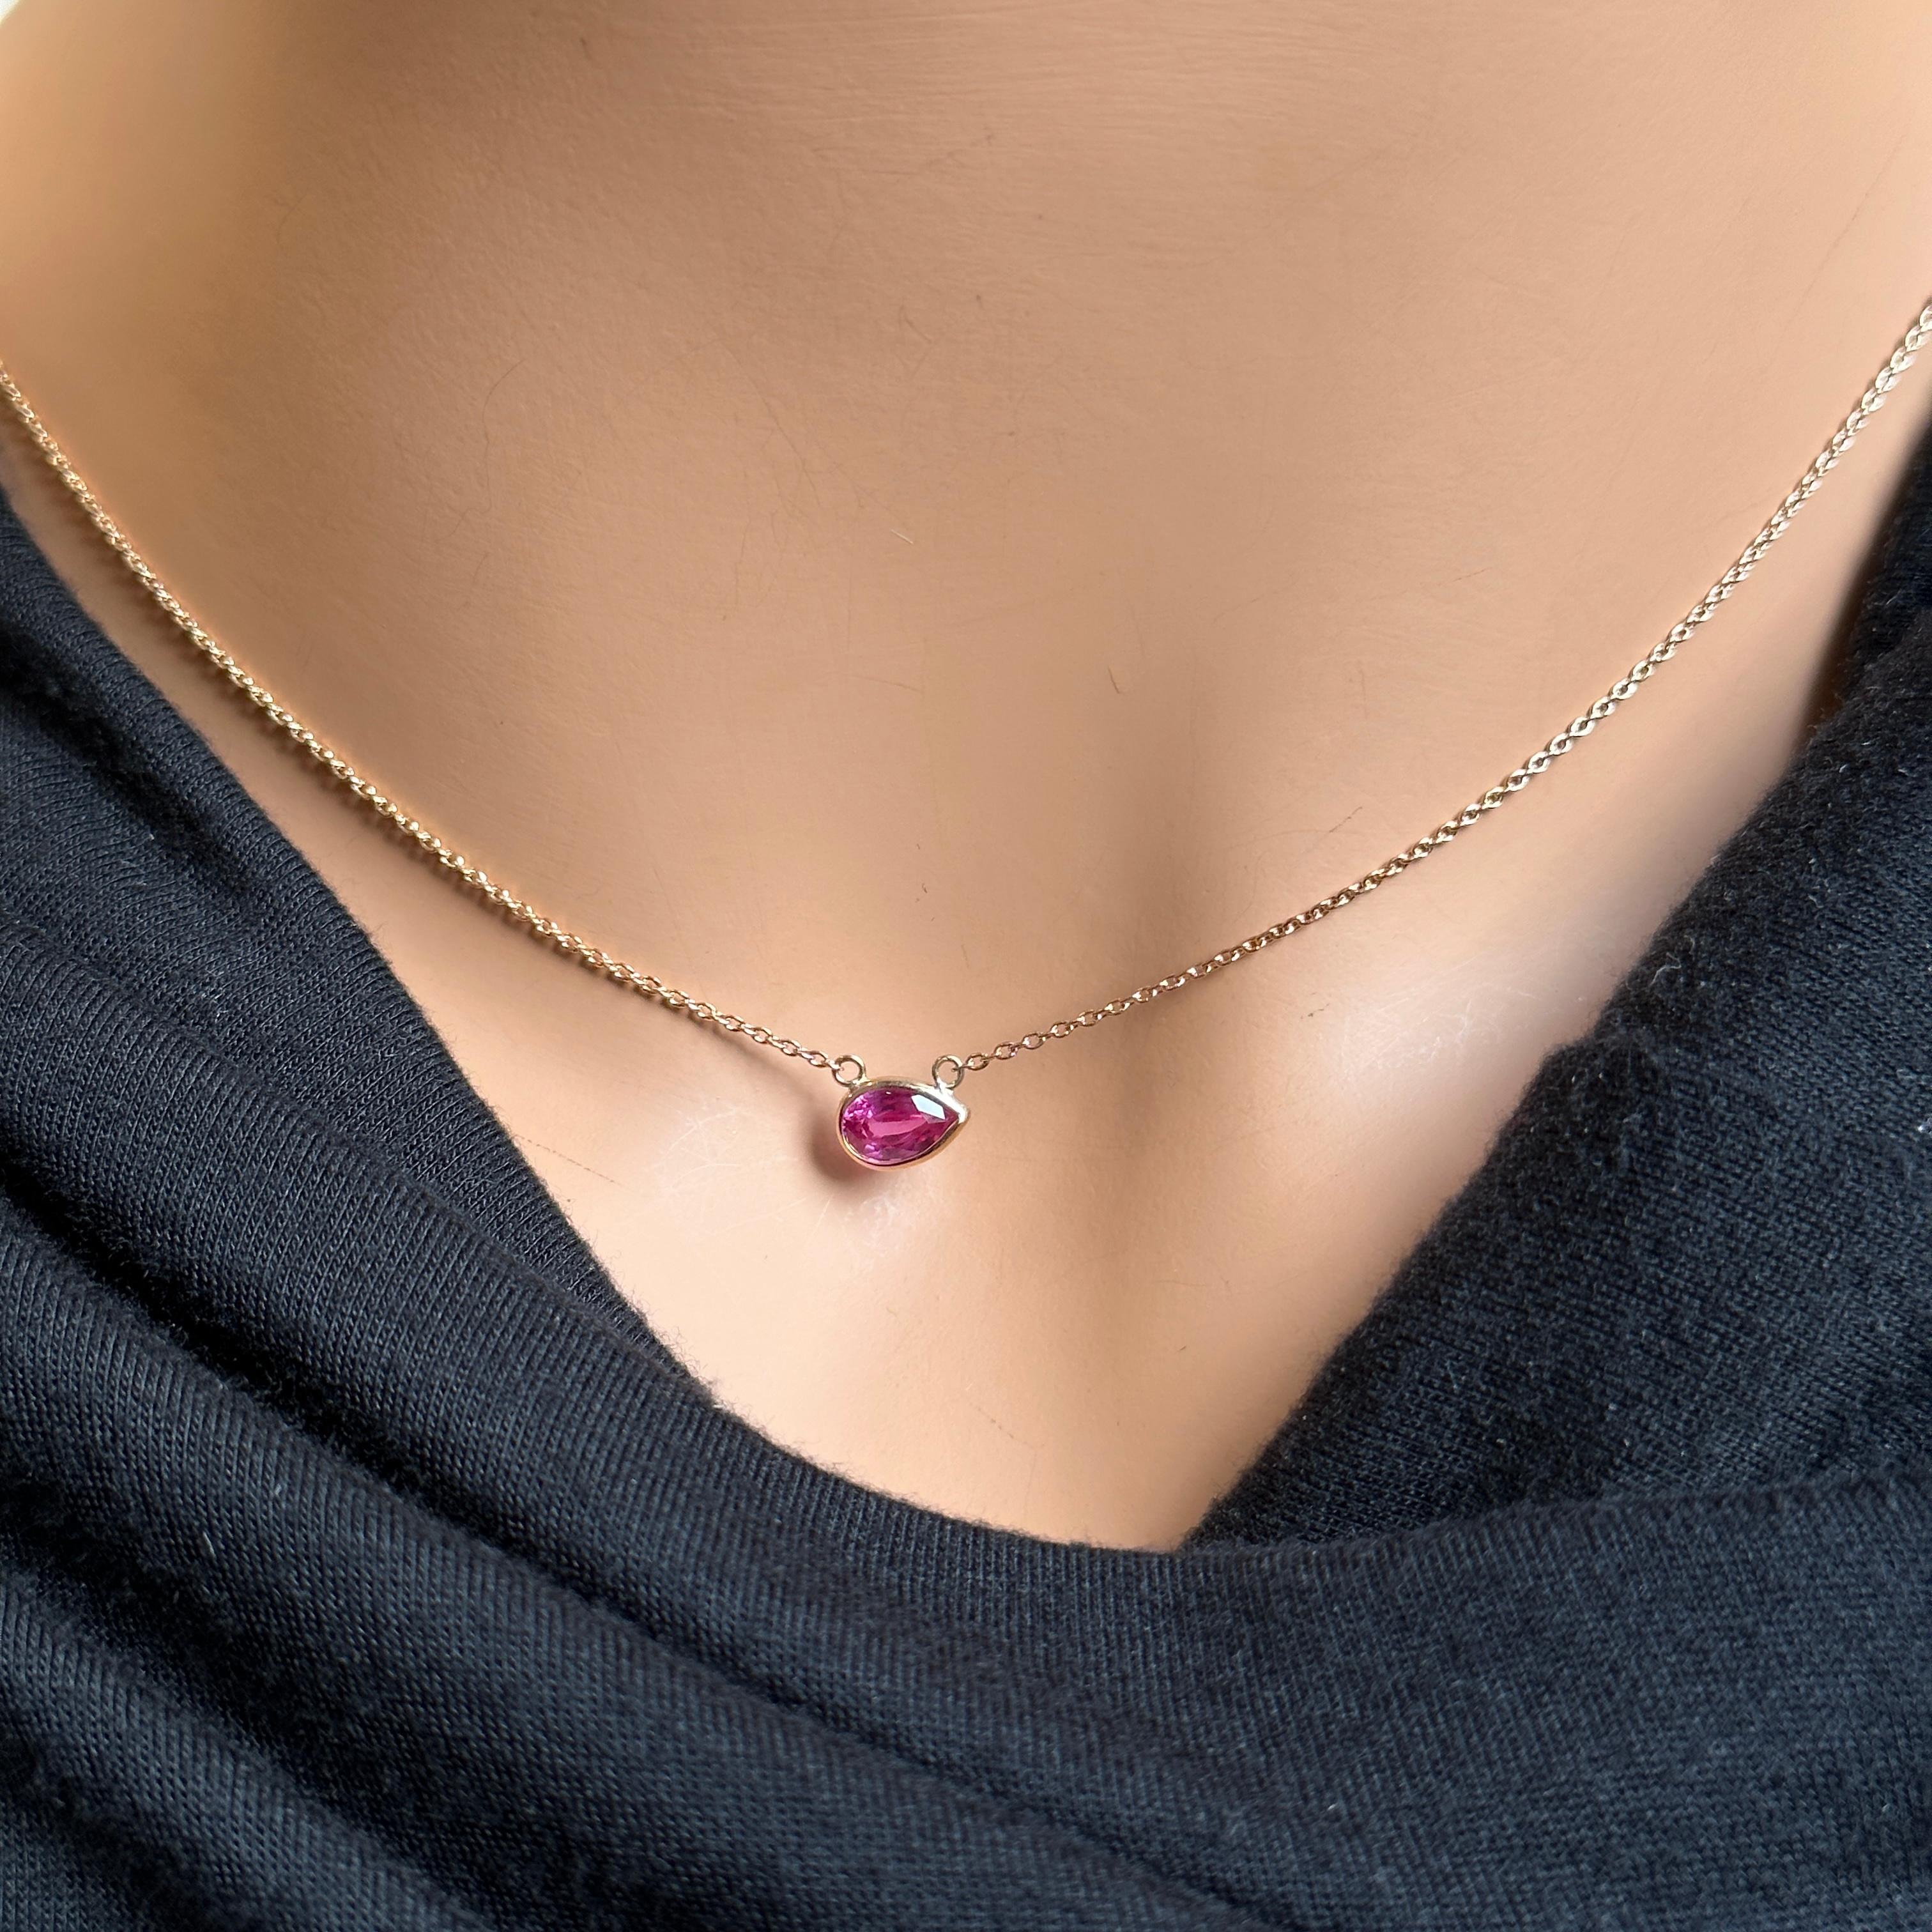 The bezel solitaire necklace combines vintage-inspired detail and modern appeal together for a look that’s timelessly elegant, simple, and classy. Each 14k solid gold bezel setting is hand-wrapped. We've built the necklace for versatility as the